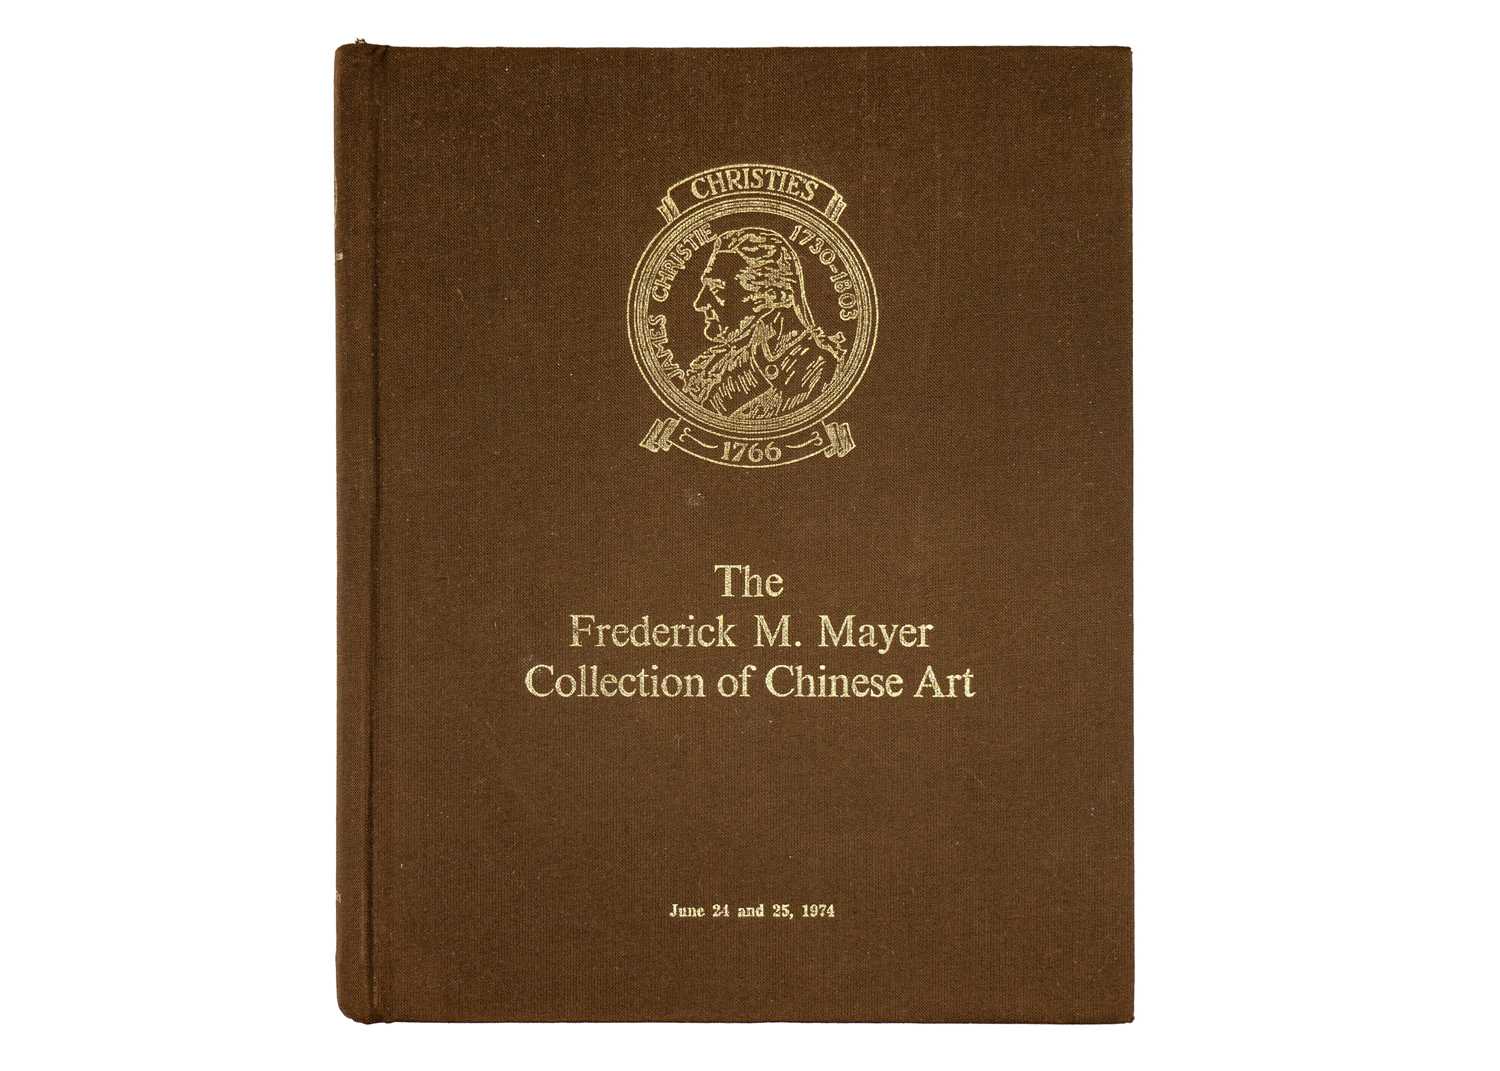 The Frederick M. Mayer Collection of Chinese Art, Christies catalogue, London, 1974. - Image 2 of 6